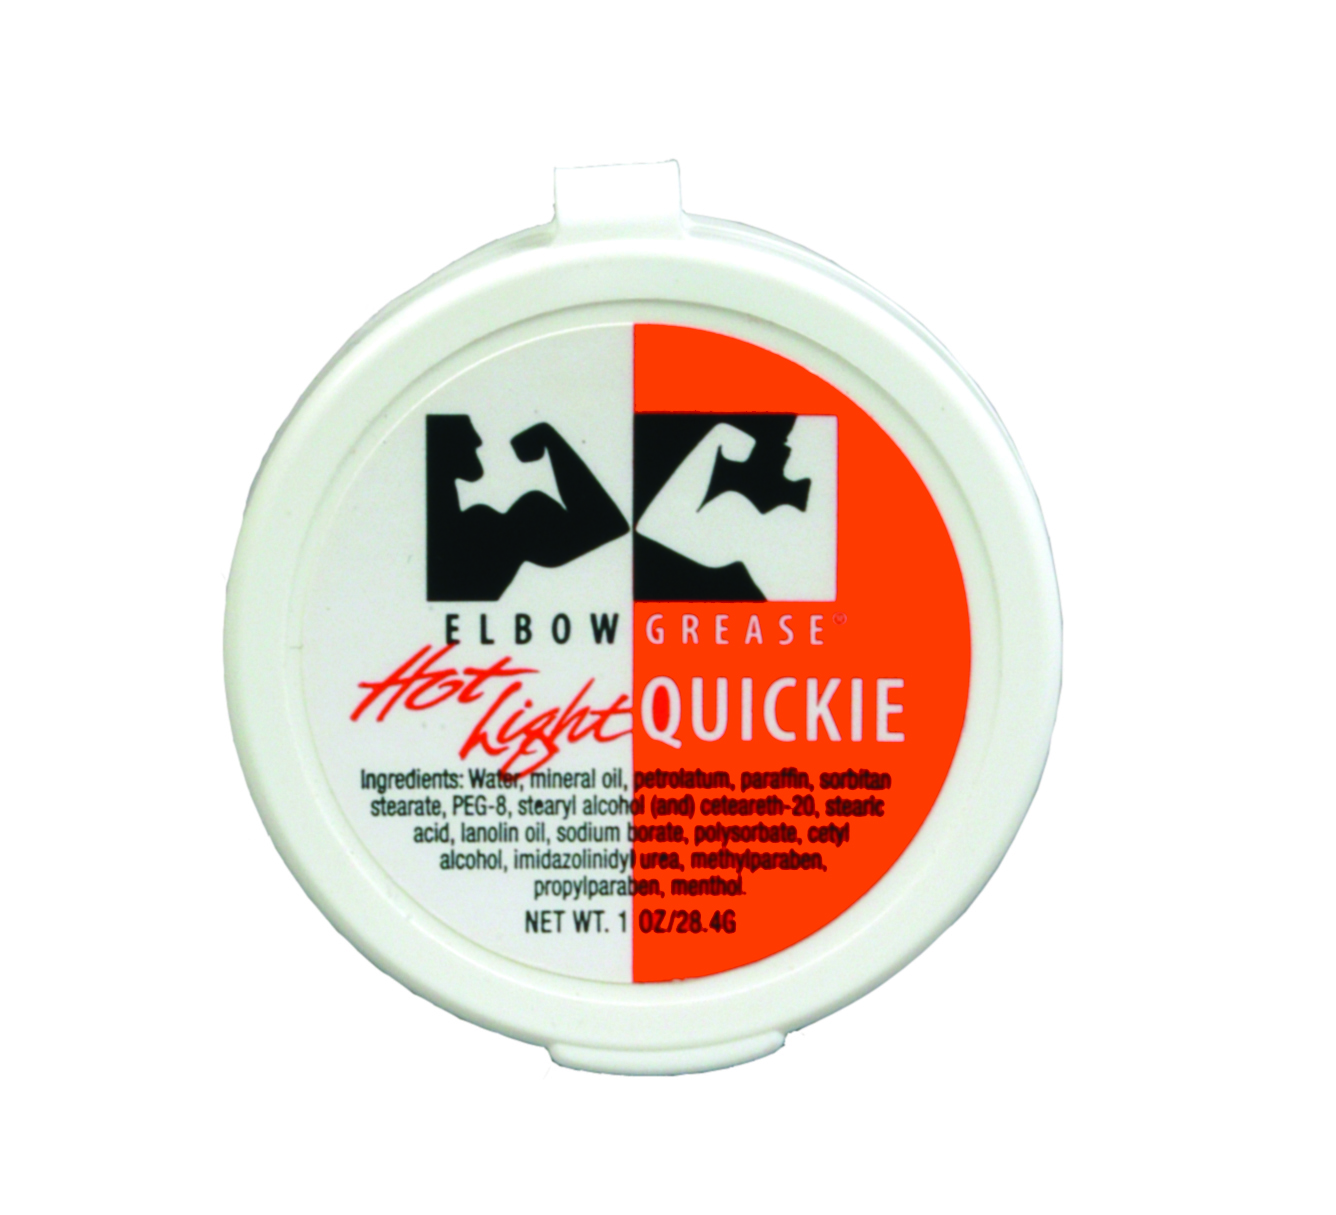 ELBOW GREASE LIGHT HOT CREAM QUICKIE  1 OZ